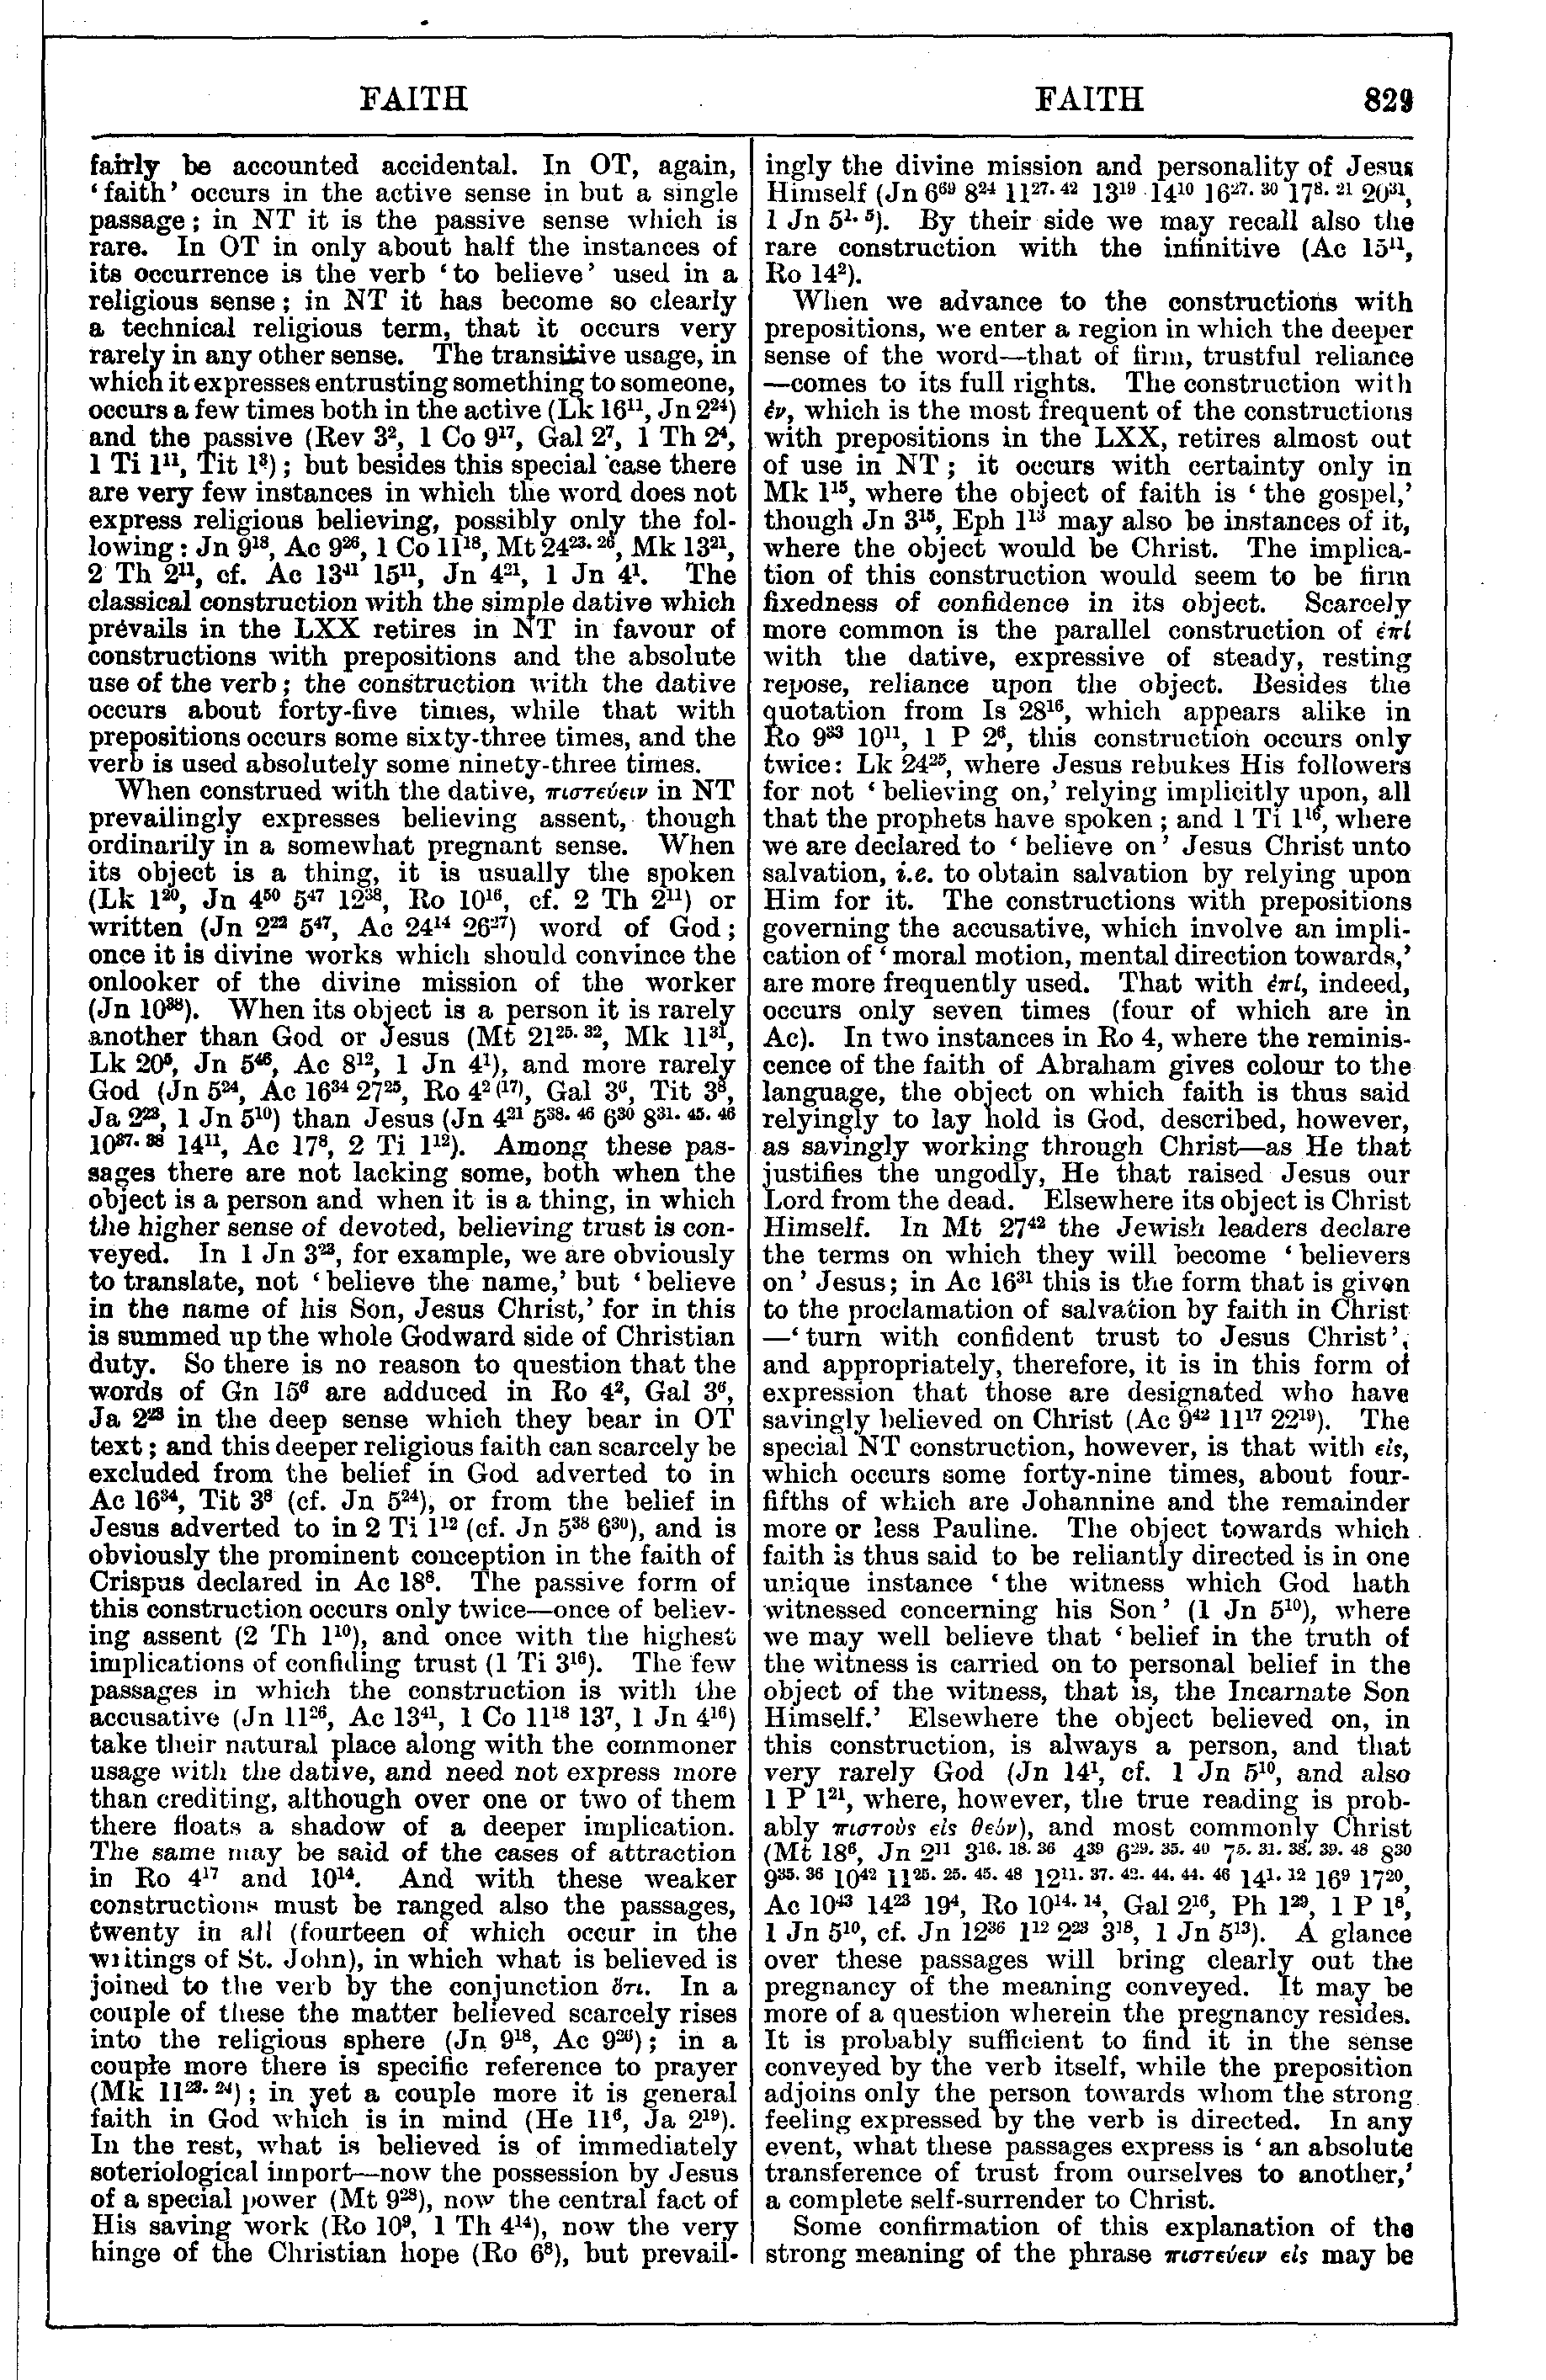 Image of page 829